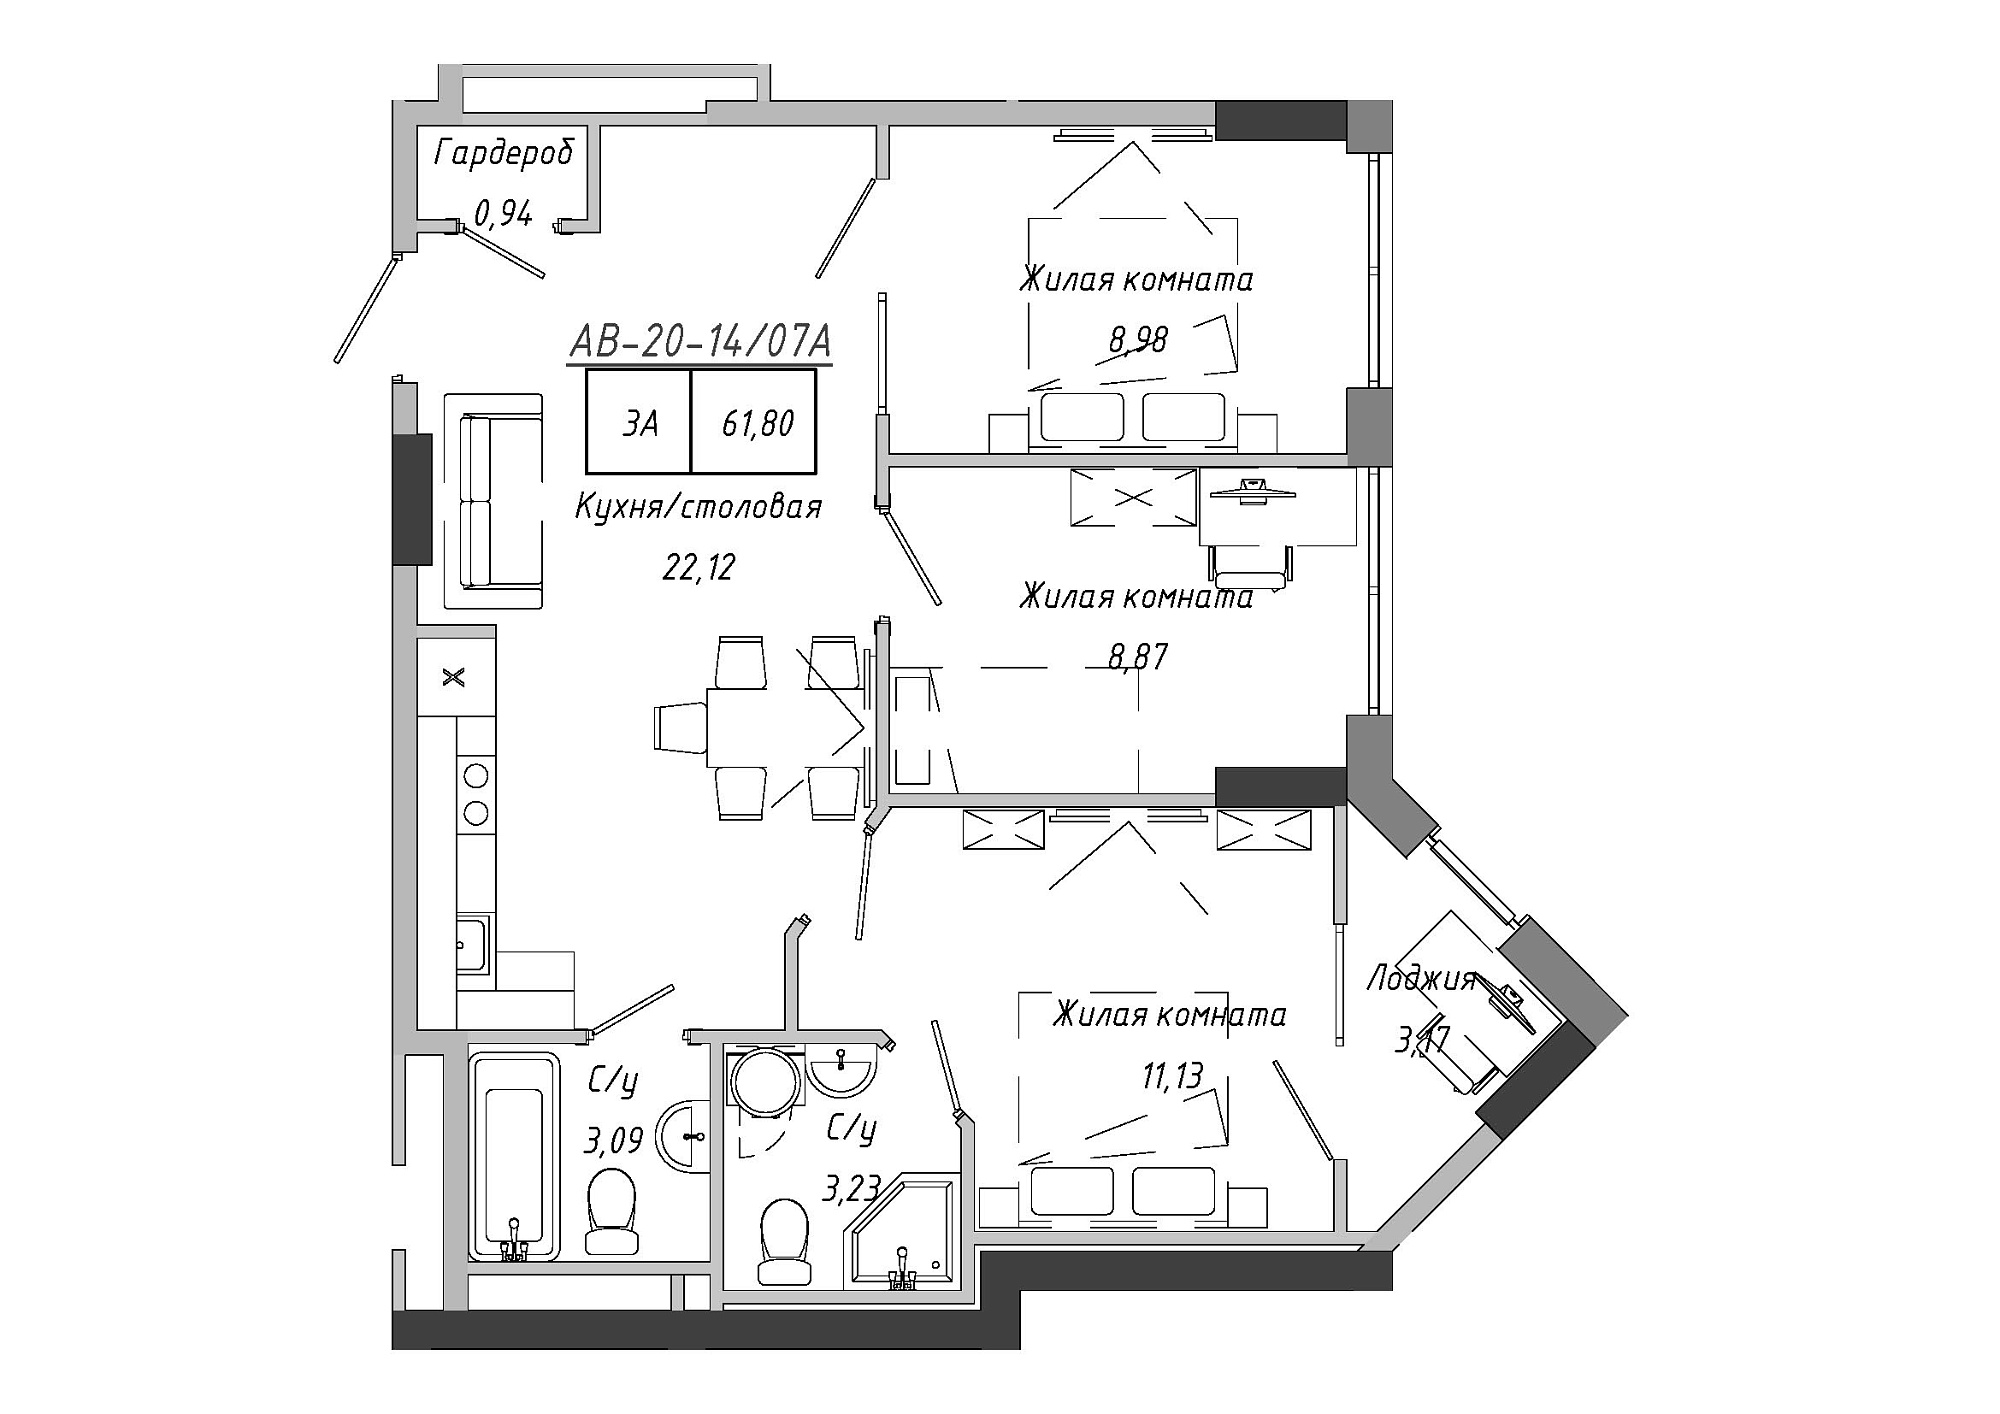 Planning 3-rm flats area 61.8m2, AB-20-14/0107a.